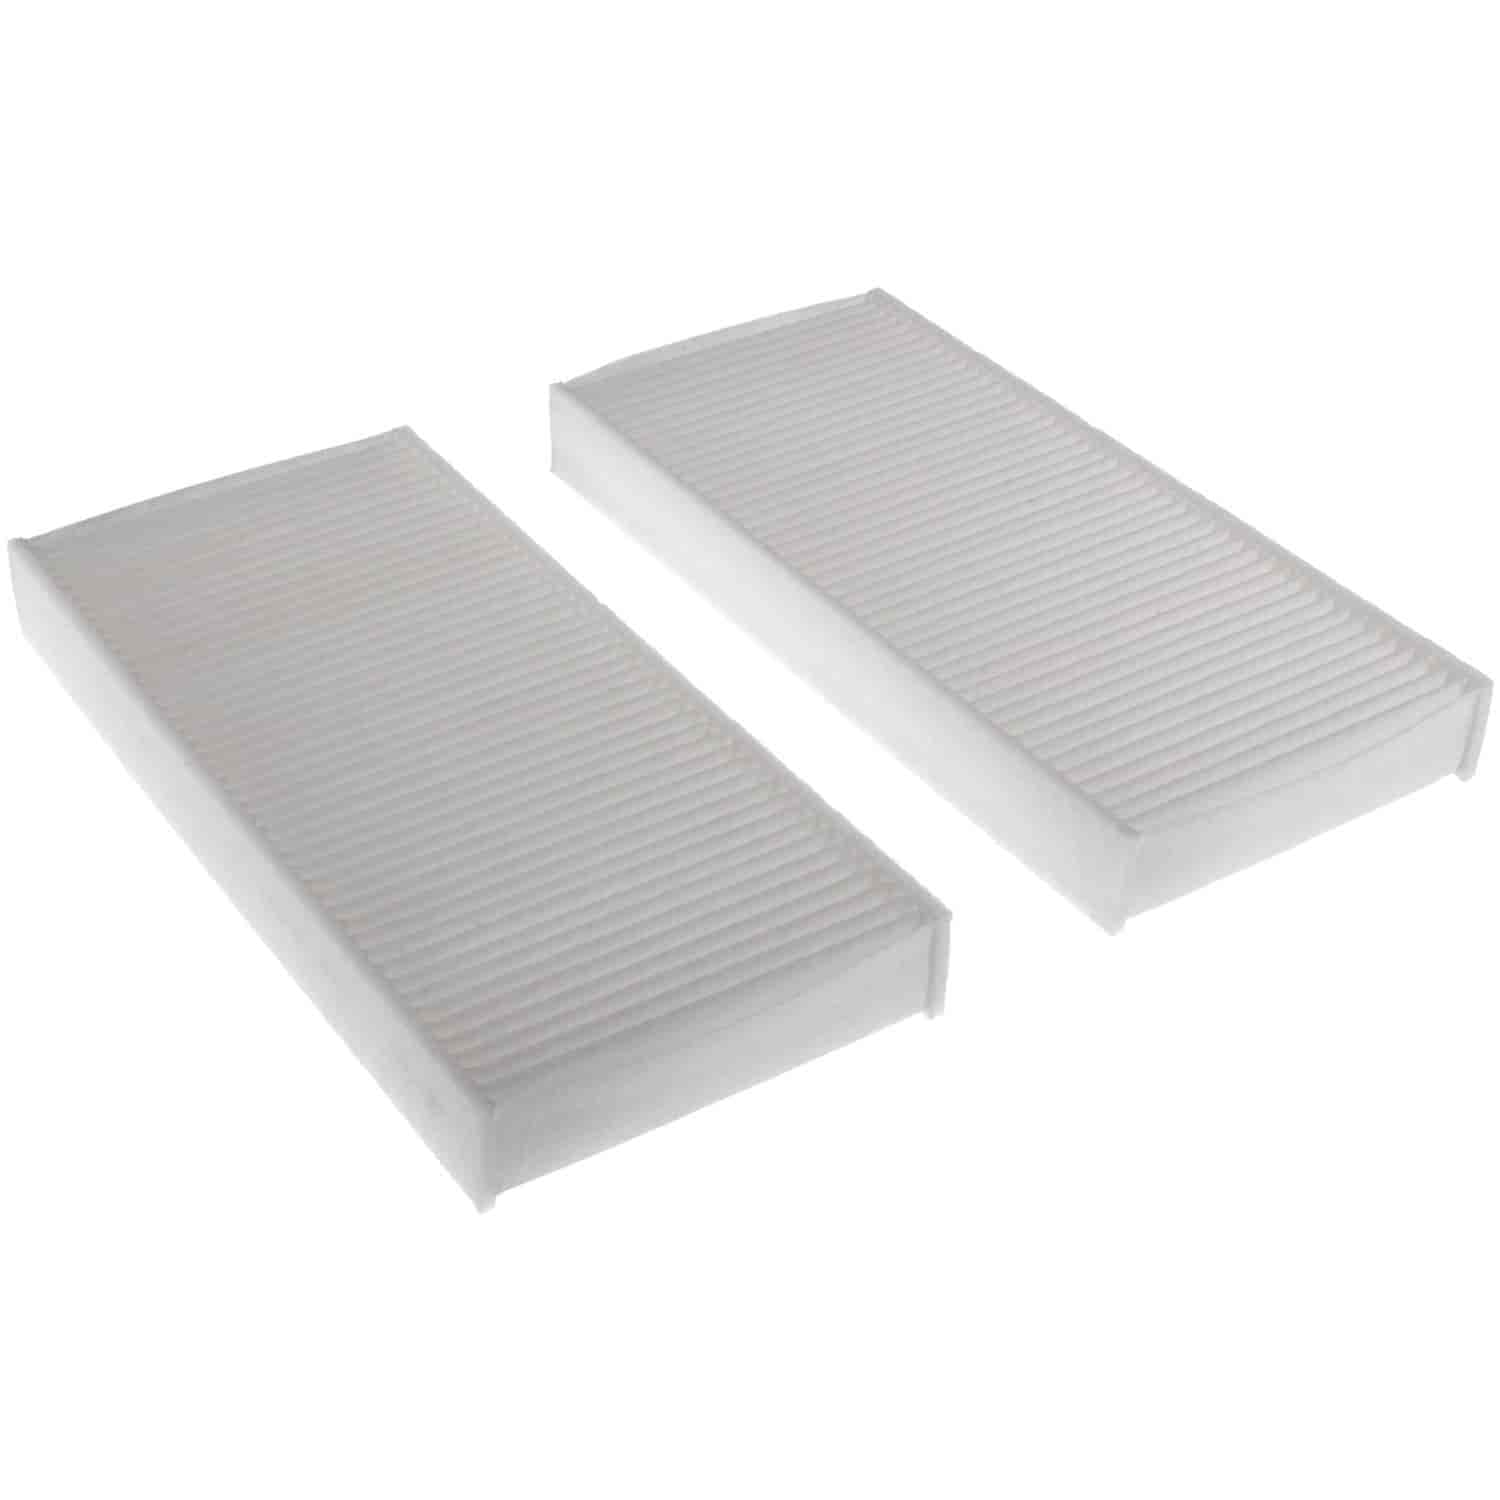 Mahle Cabin Air Filter for Nissan Trk Armada